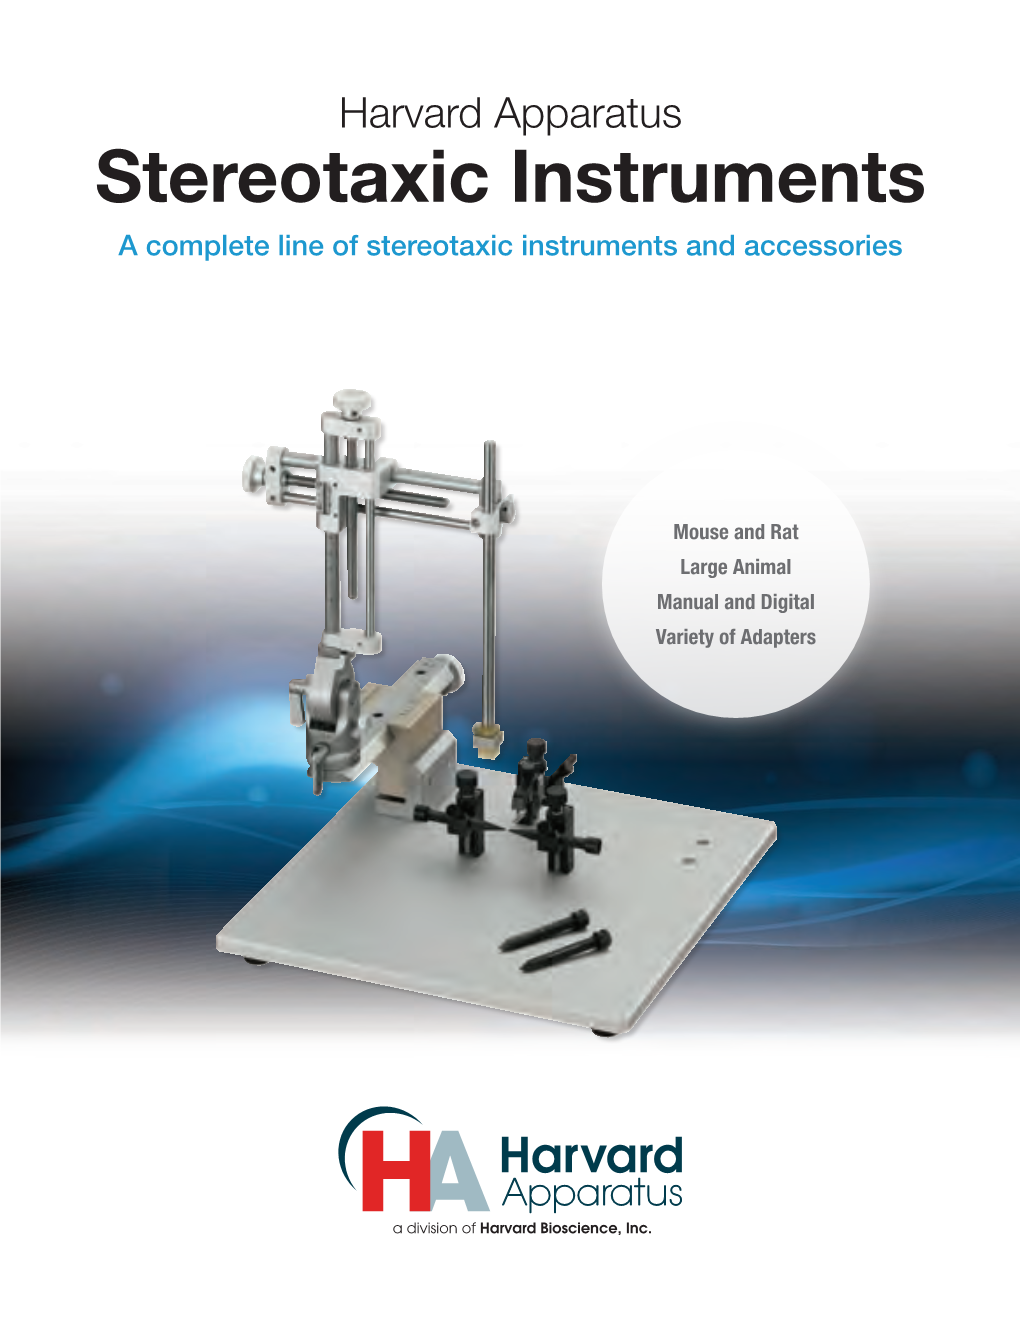 Stereotaxic Instruments a Complete Line of Stereotaxic Instruments and Accessories